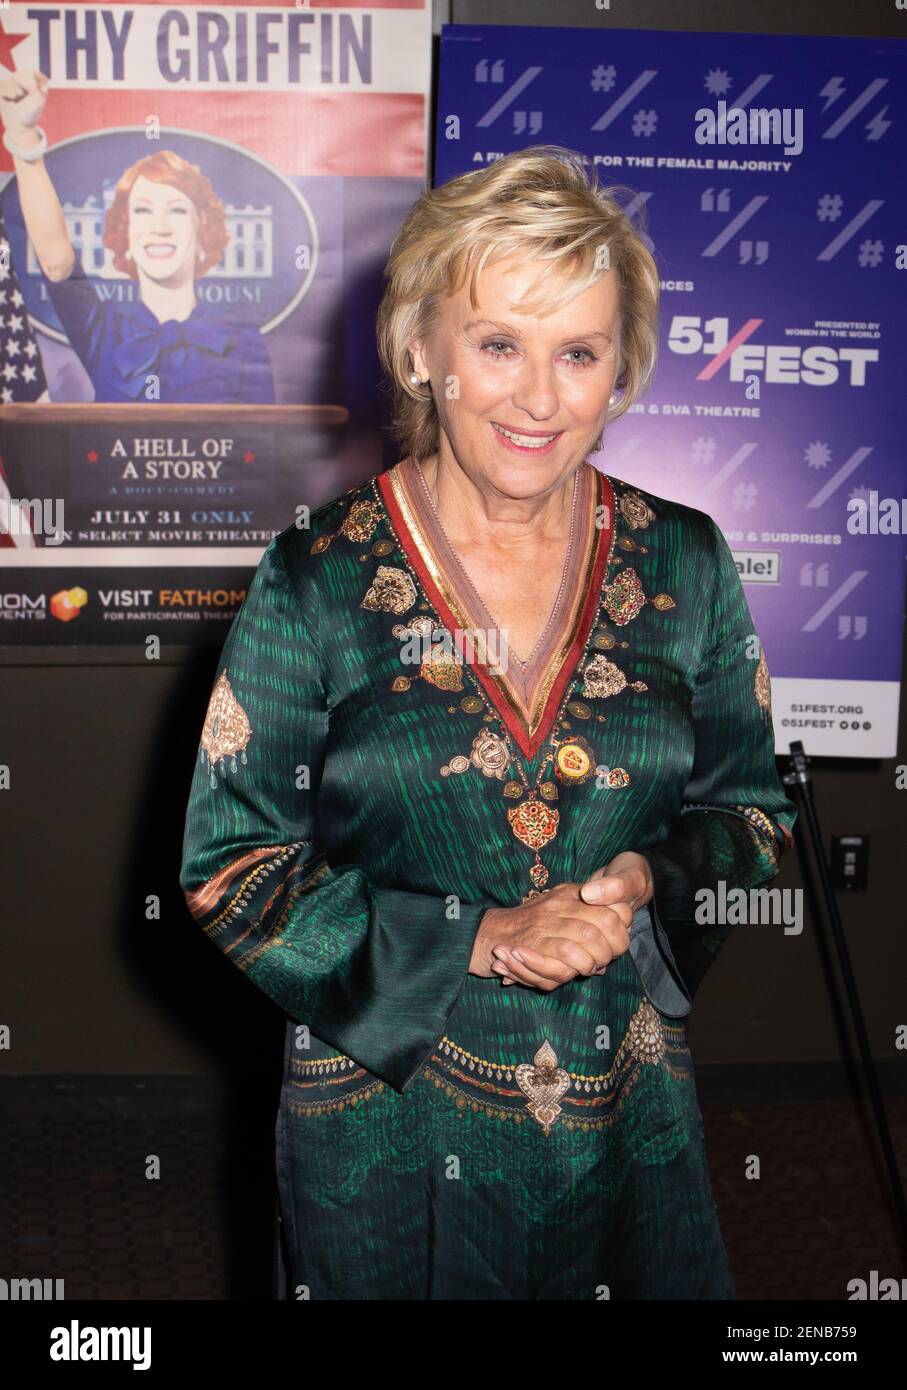 Tina Brown, CEO & Founder of Tina Brown Live Media/ Women in the World, attends the 'Kathy Griffin: A Hell Of A Story' New York premiere during opening night of 51Fest at SVA Theater in New York City, NY, on June 18, 2019. (Photo by Arturo Holmes/ Sipa USA) Stock Photo